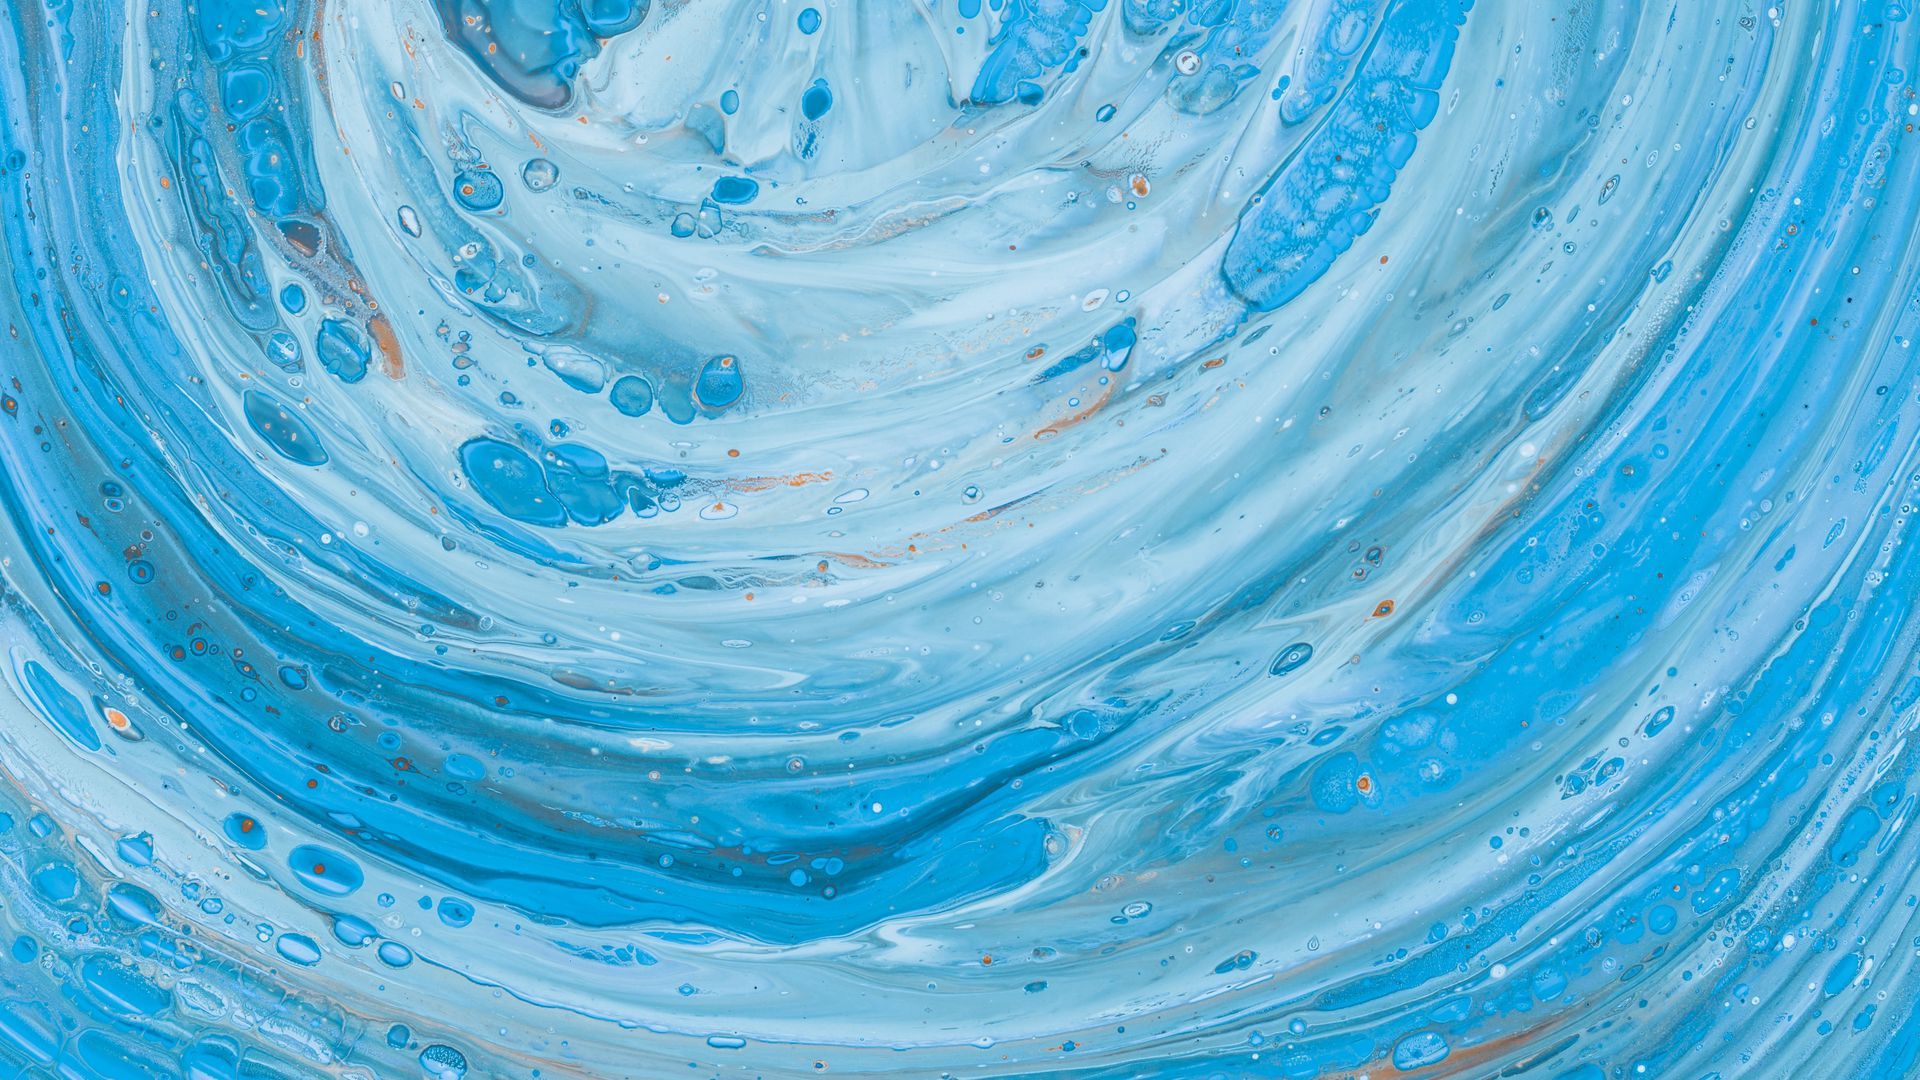 Download wallpaper 1920x1080 paint, fluid art, stains, liquid, blue, abstraction full hd, hdtv, fhd, 1080p HD background